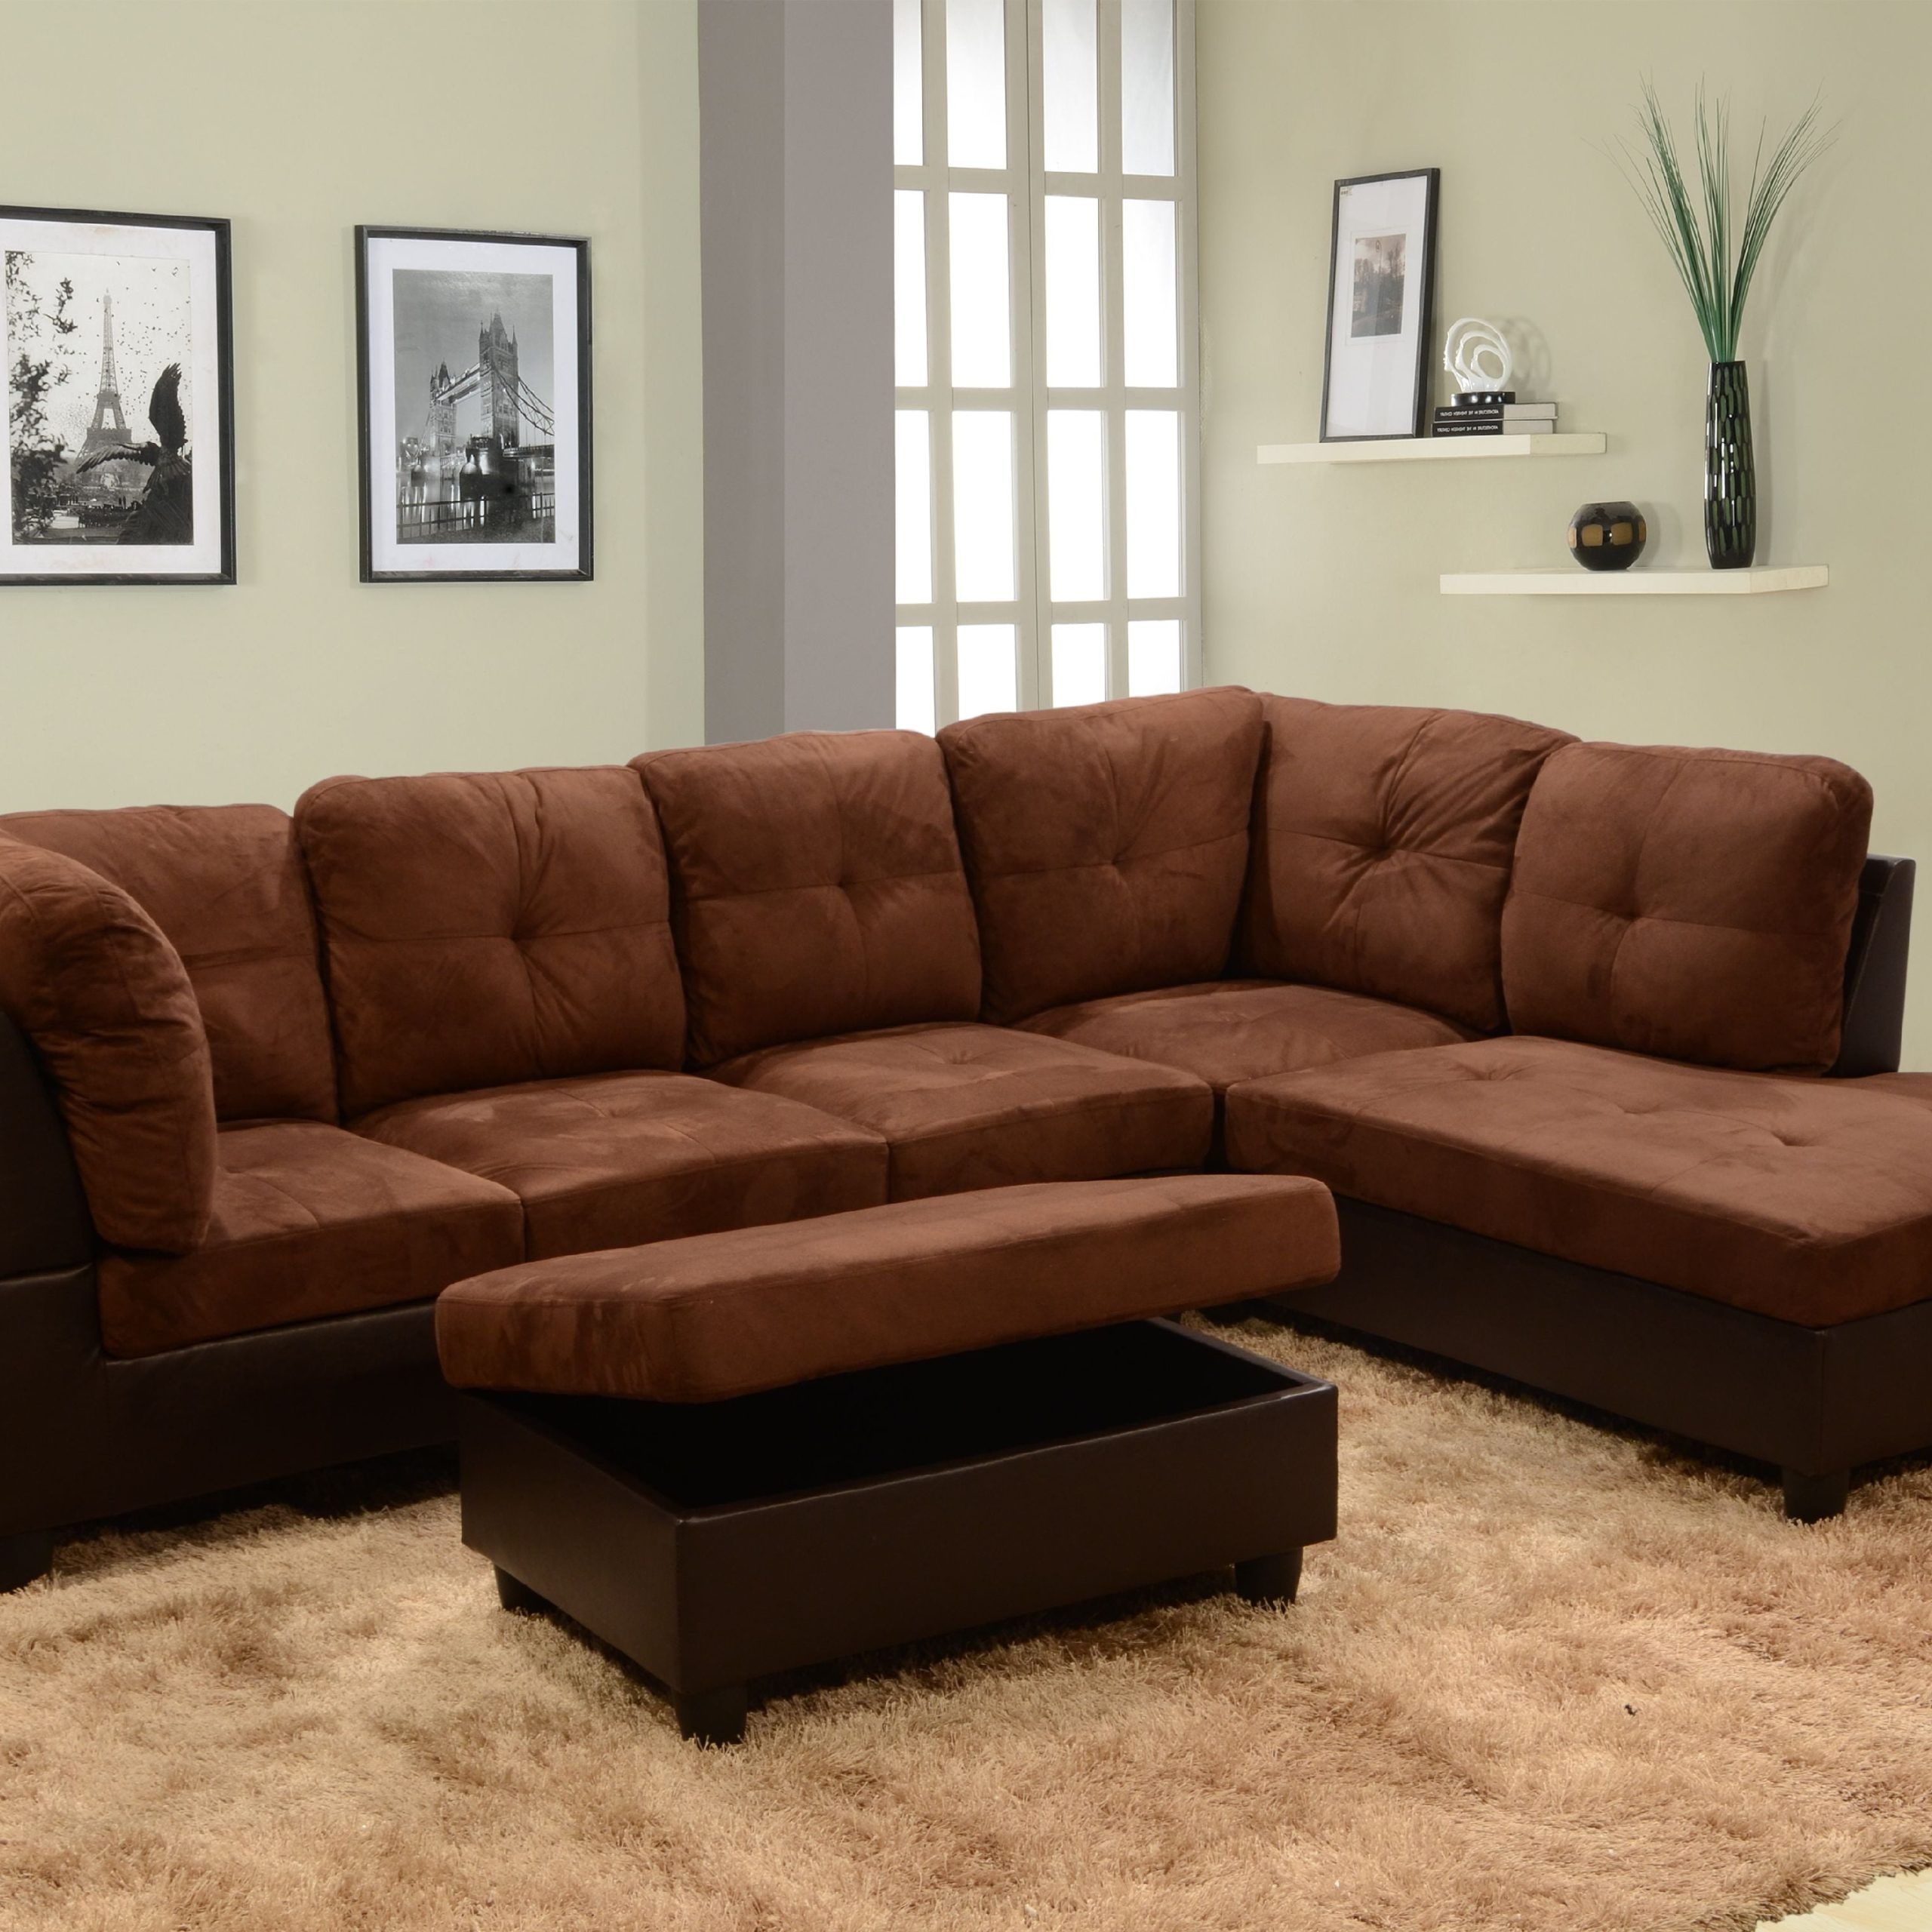 Matt Right Facing Sectional Sofa With Ottoman,chocolate – Walmart Within Sofas With Ottomans (View 3 of 20)